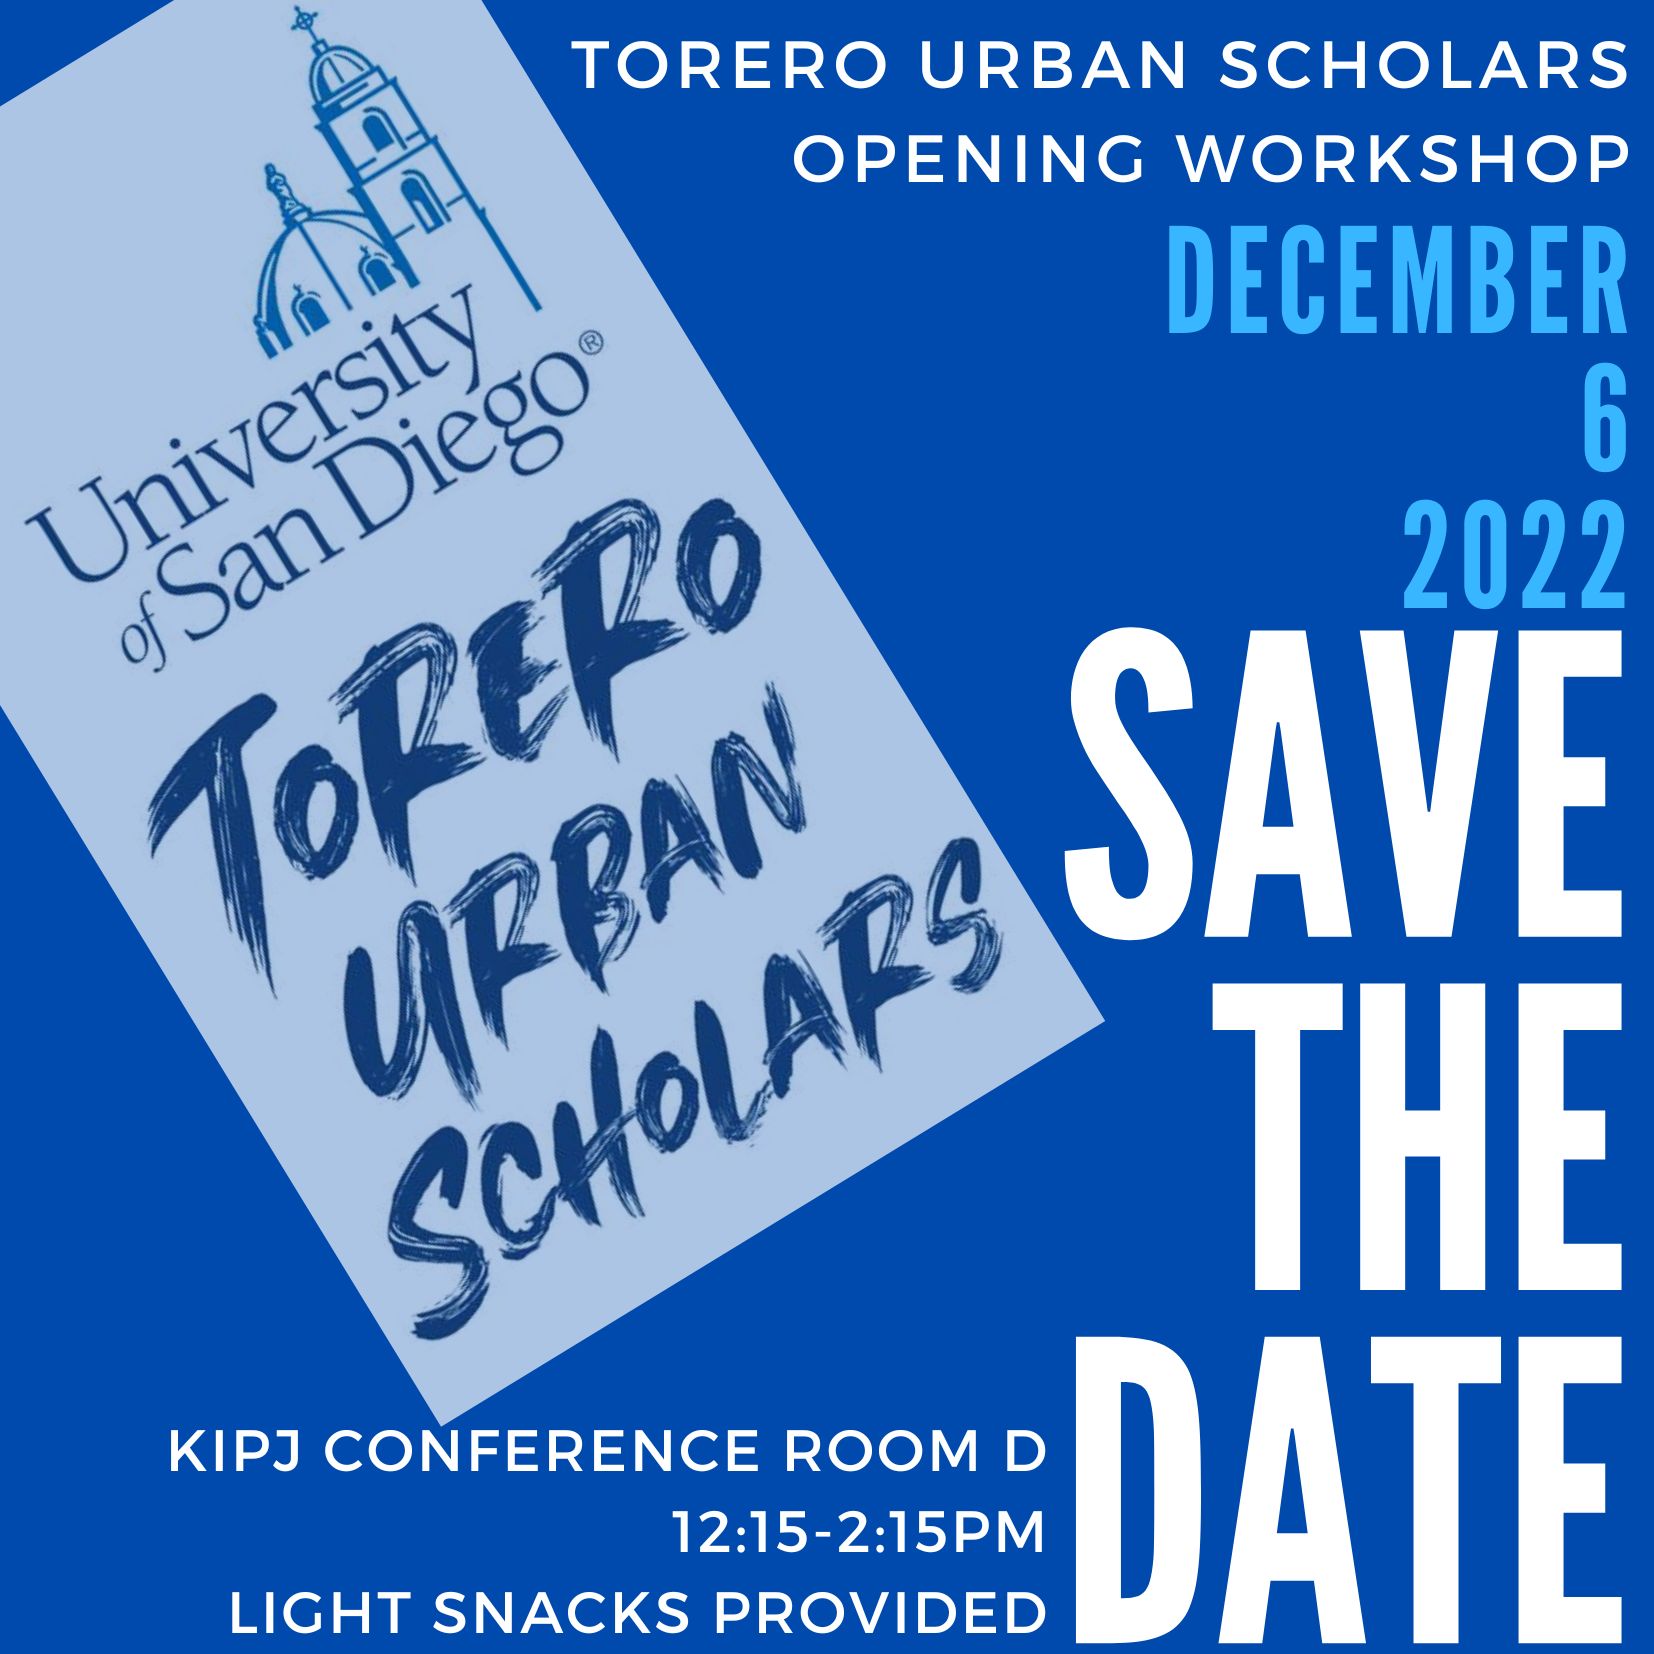 Torero Urban Scholars Save The Date for Opening Workshop